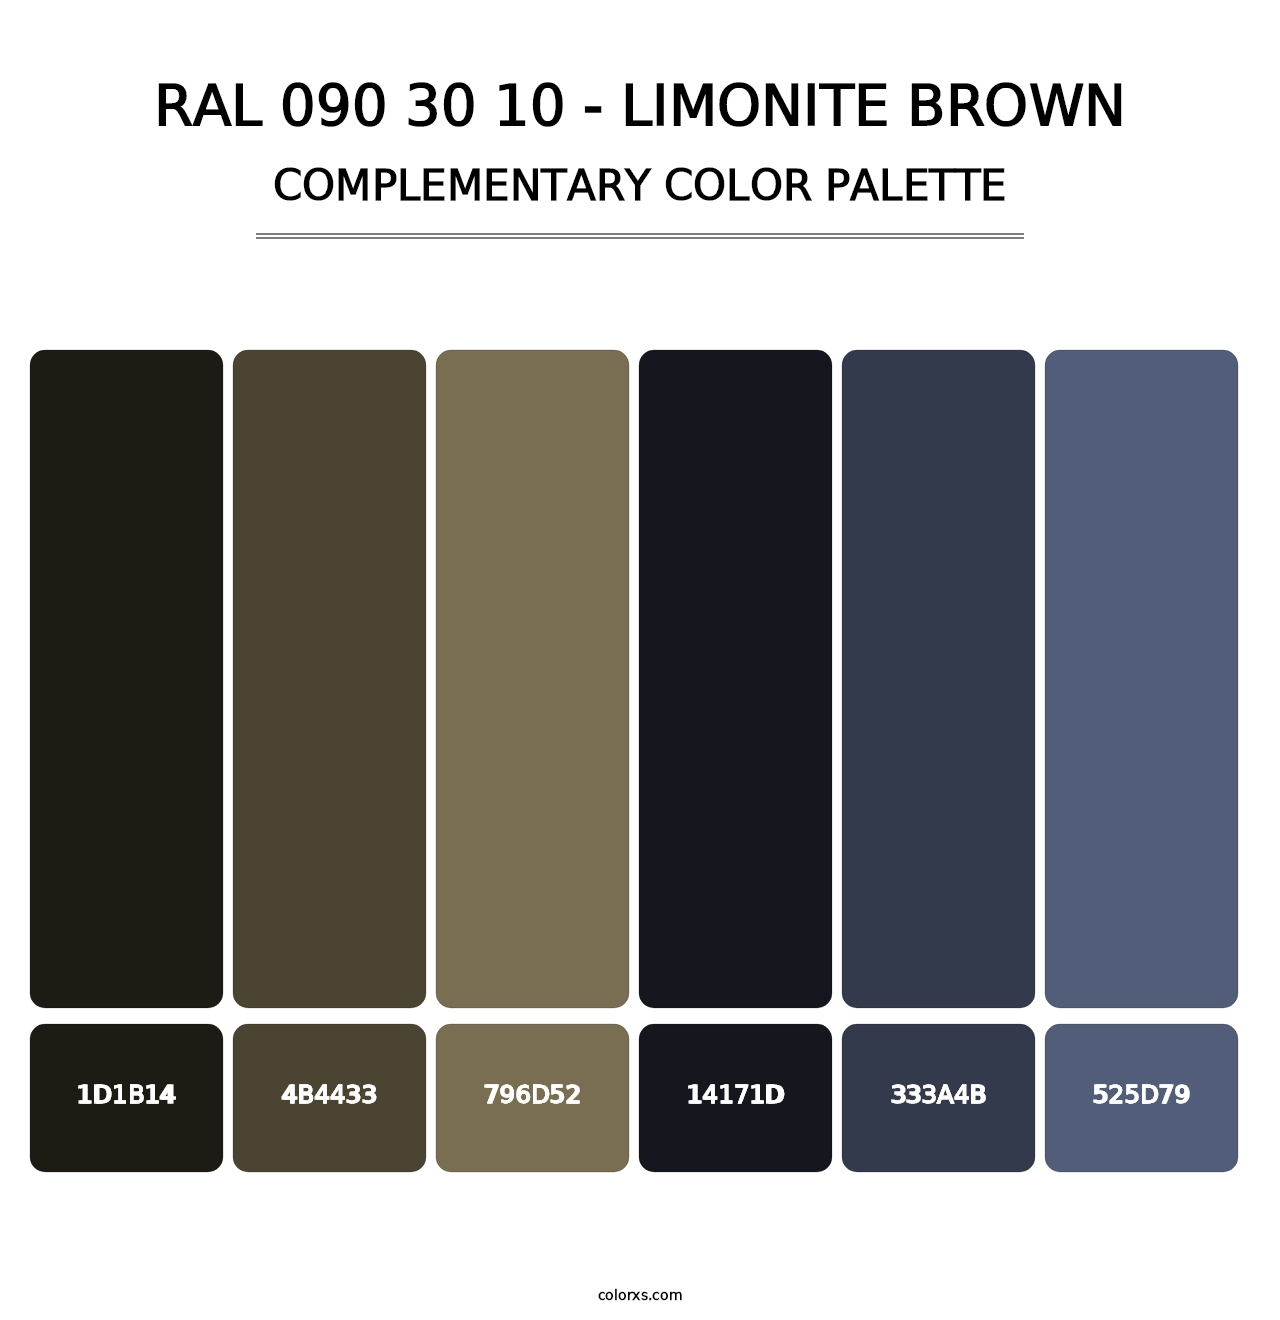 RAL 090 30 10 - Limonite Brown - Complementary Color Palette